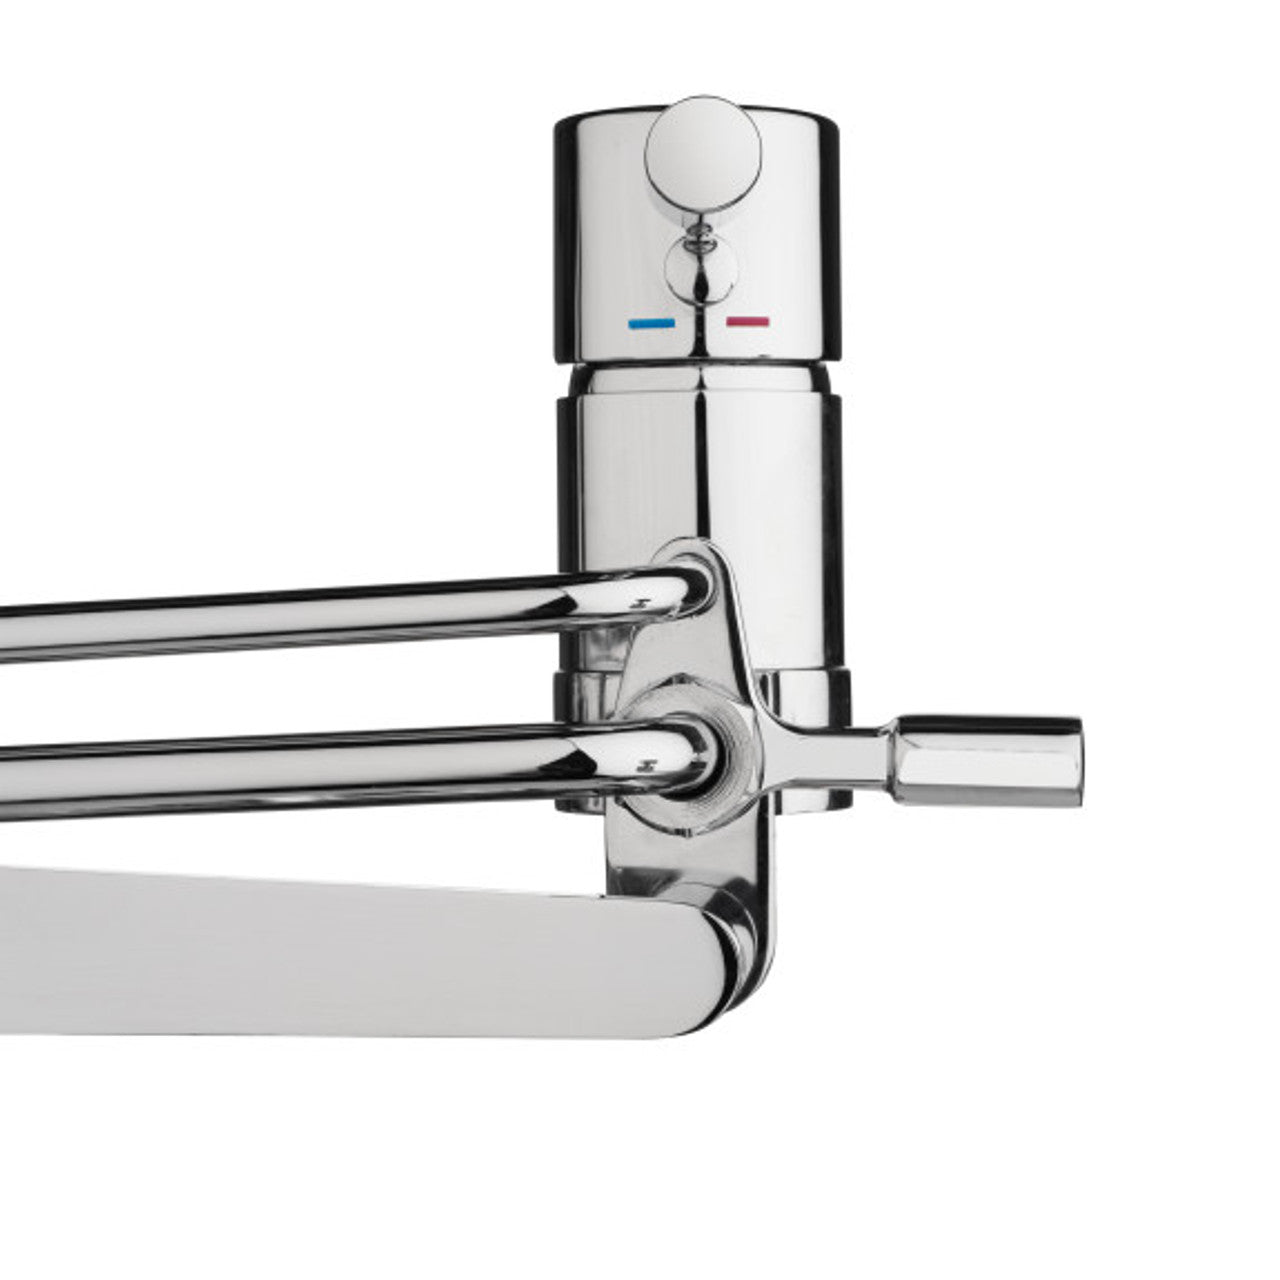 Side-Mounted Bidet Attachment with Adjustable Spray Wand, Dual Temperature